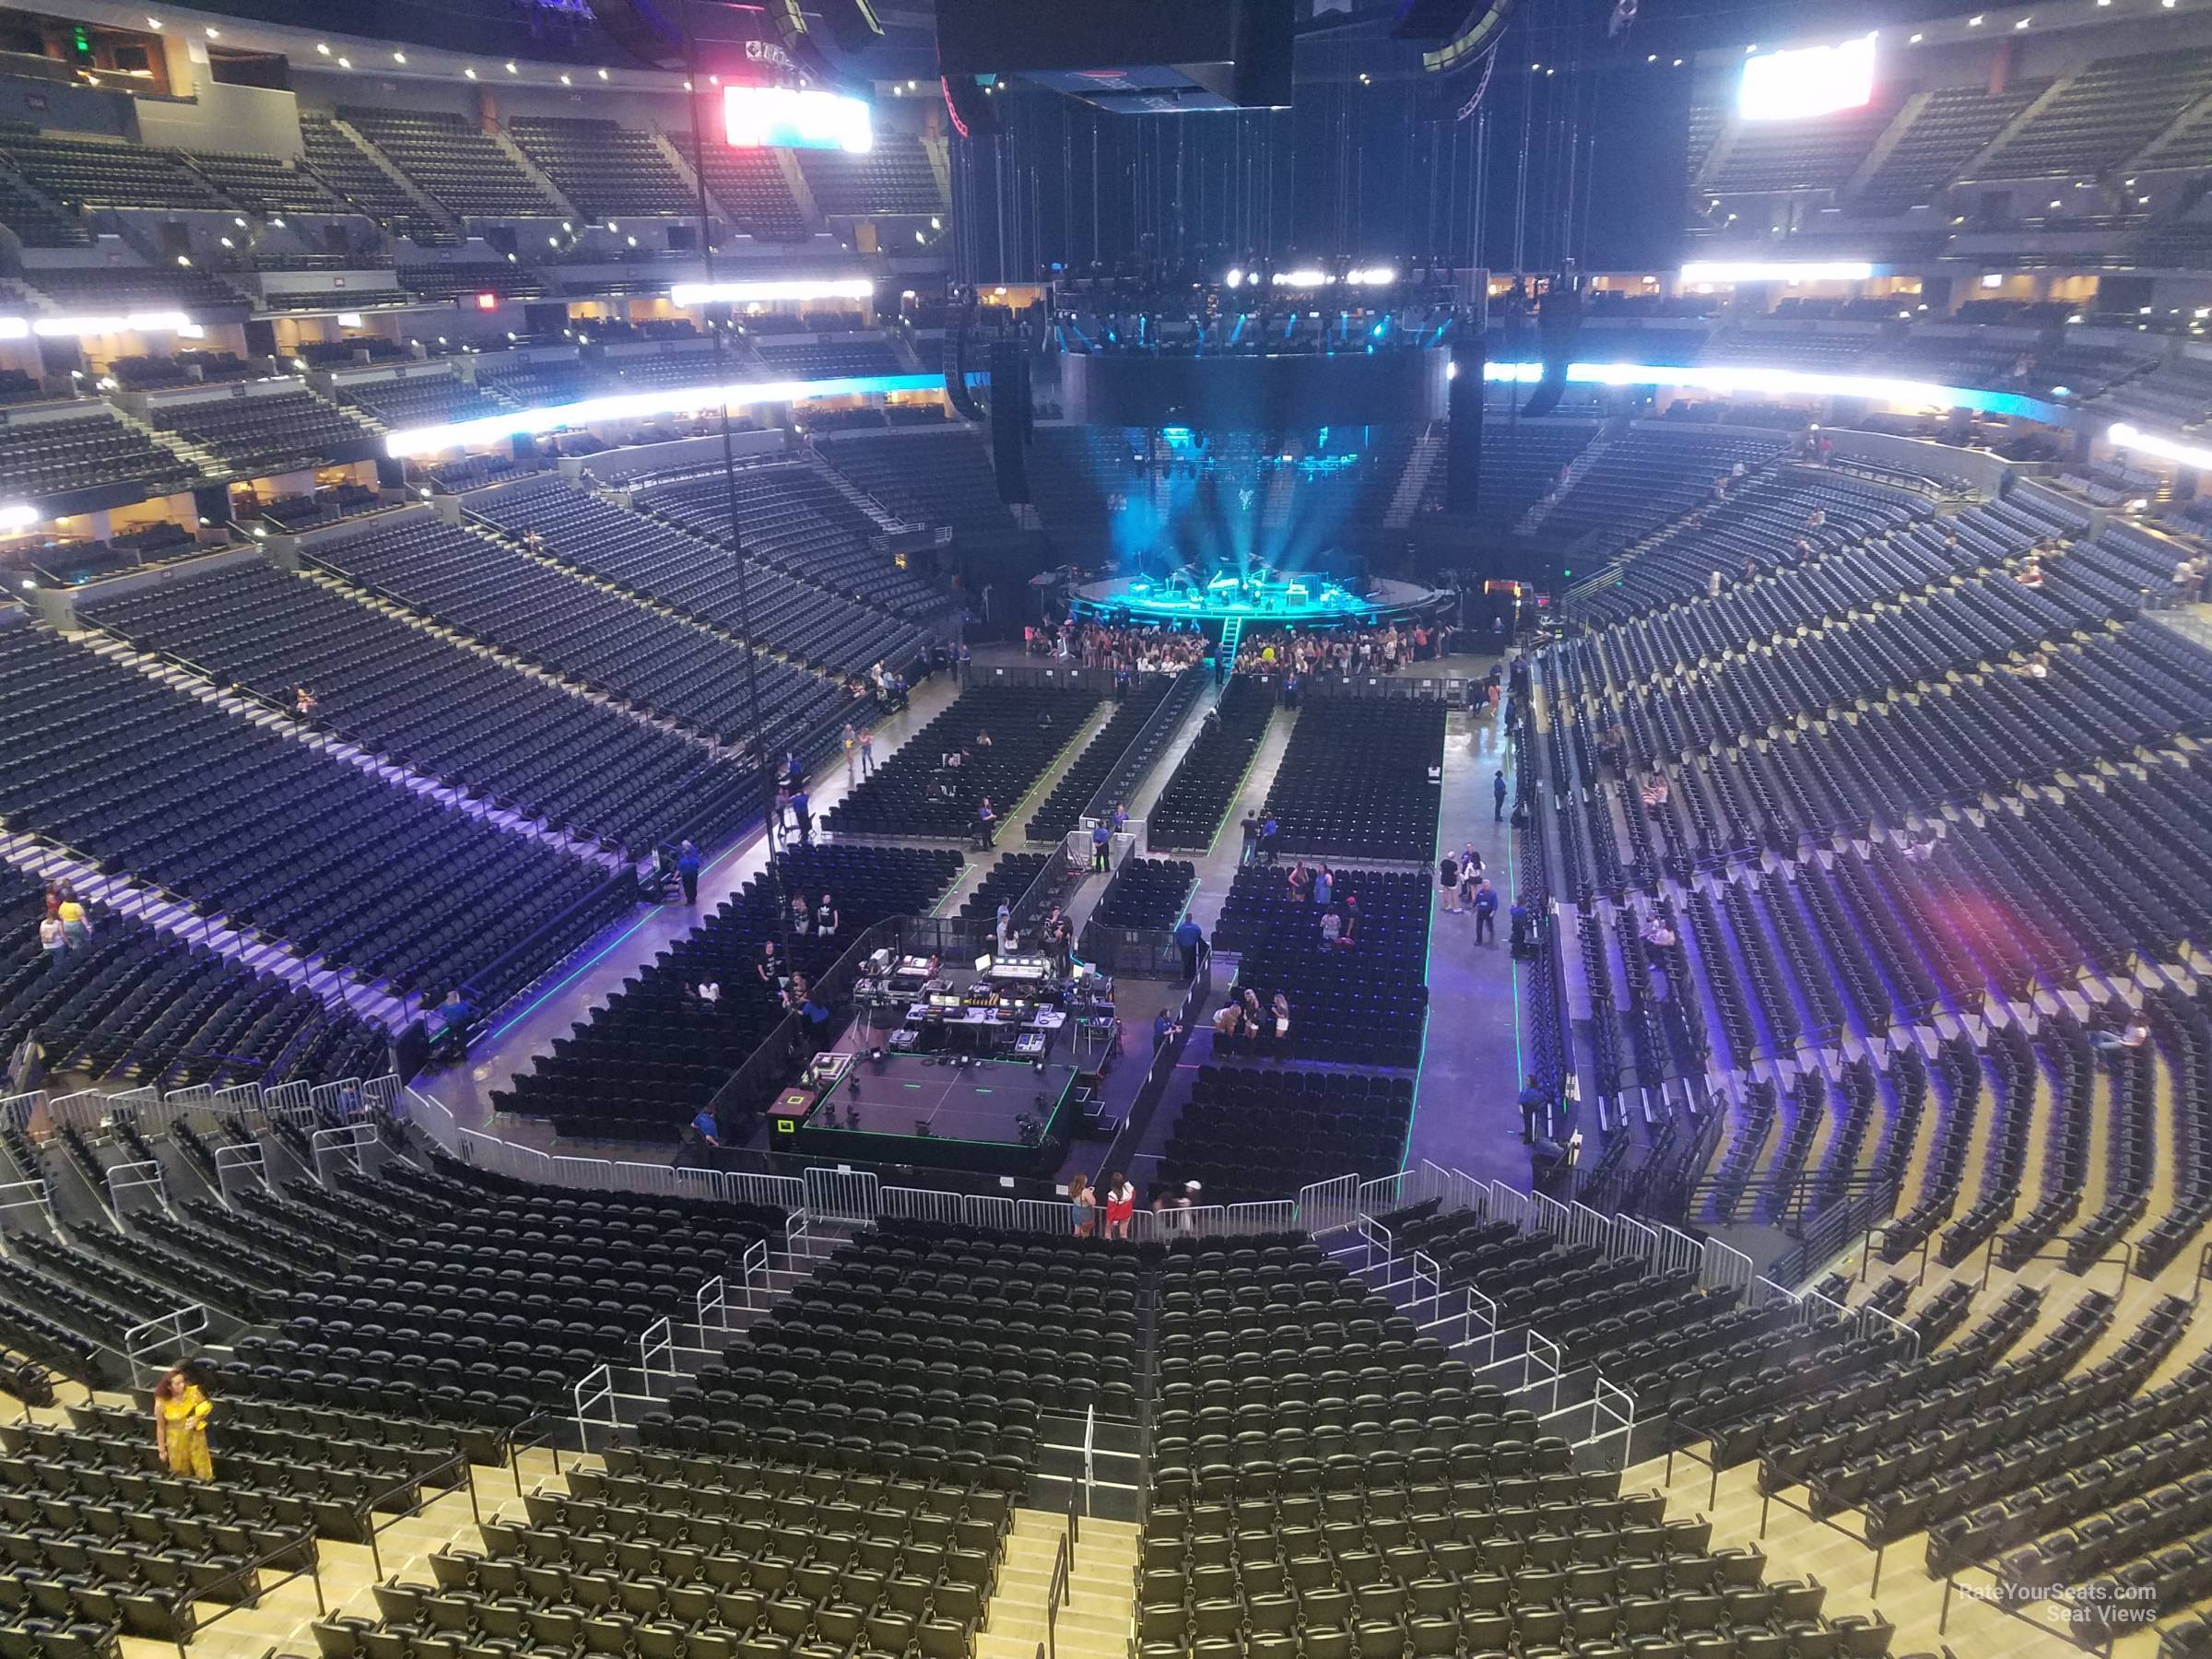 section 319, row 3 seat view  for concert - ball arena